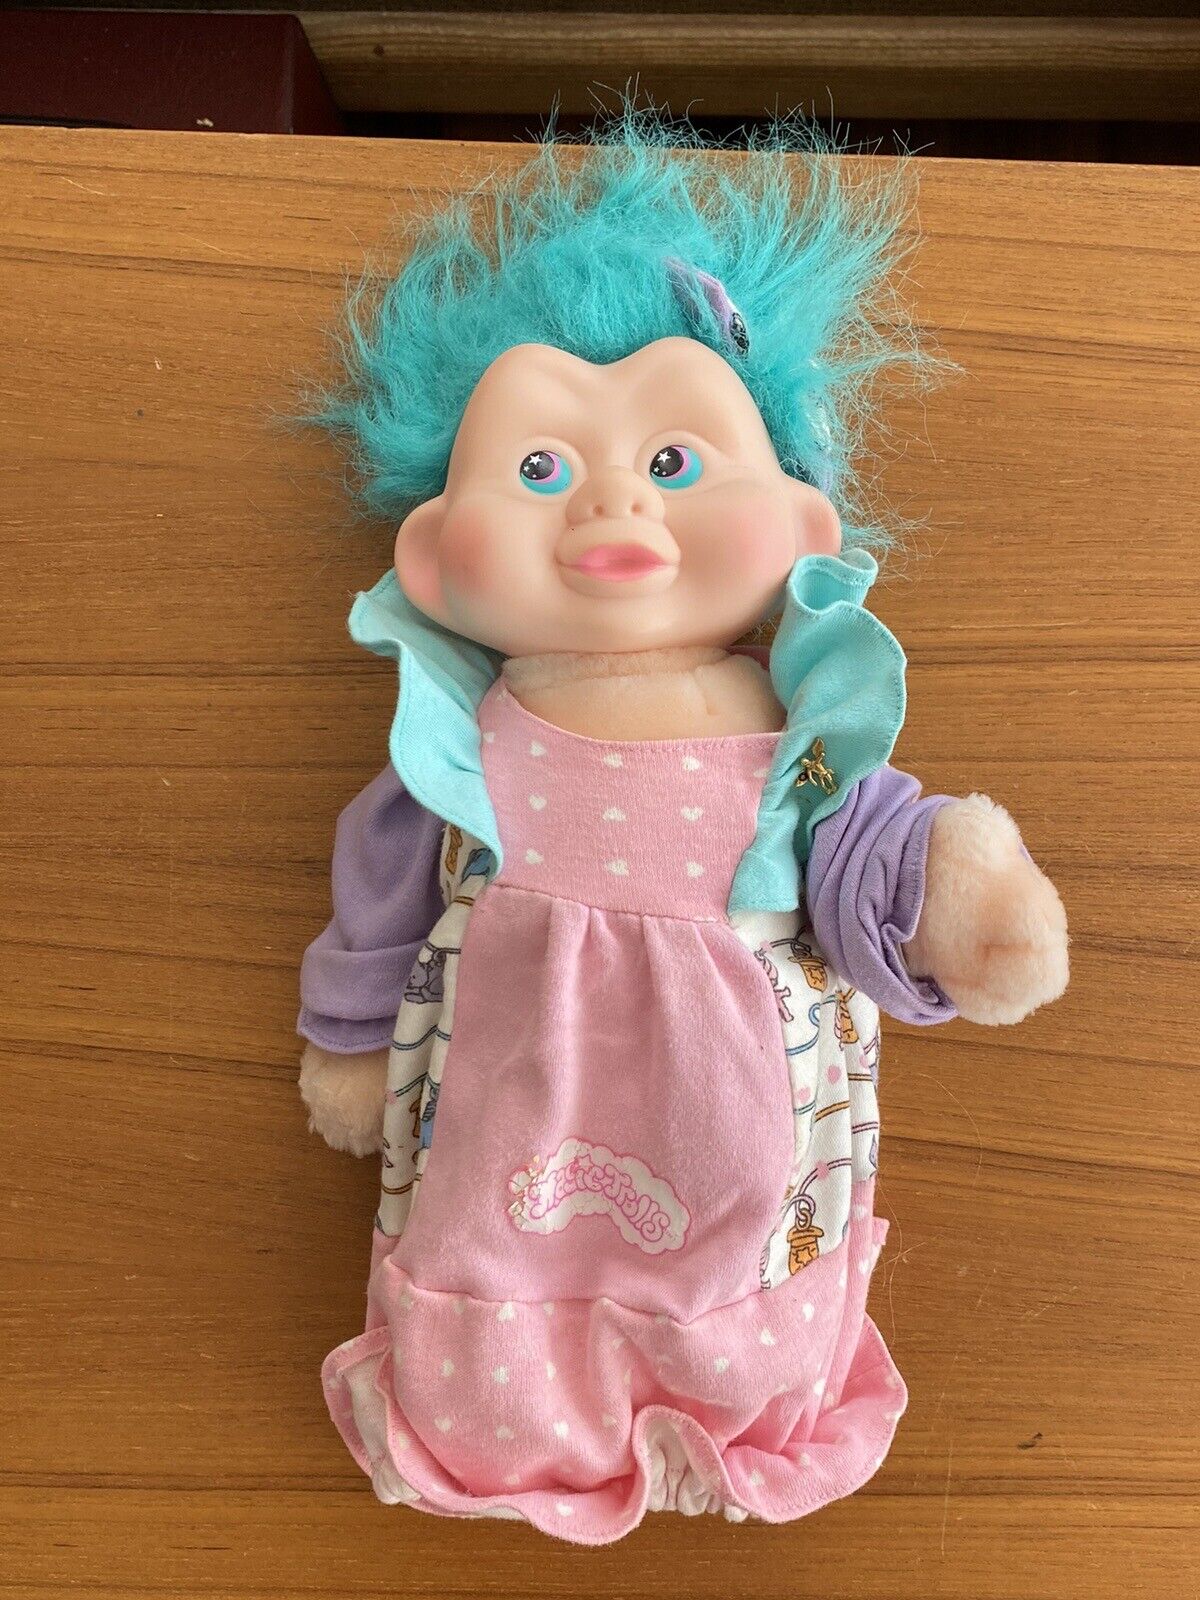 Applause Toys Magic Troll Plush Vintage 11” Soft Body Green Hair Pink Gown 1991